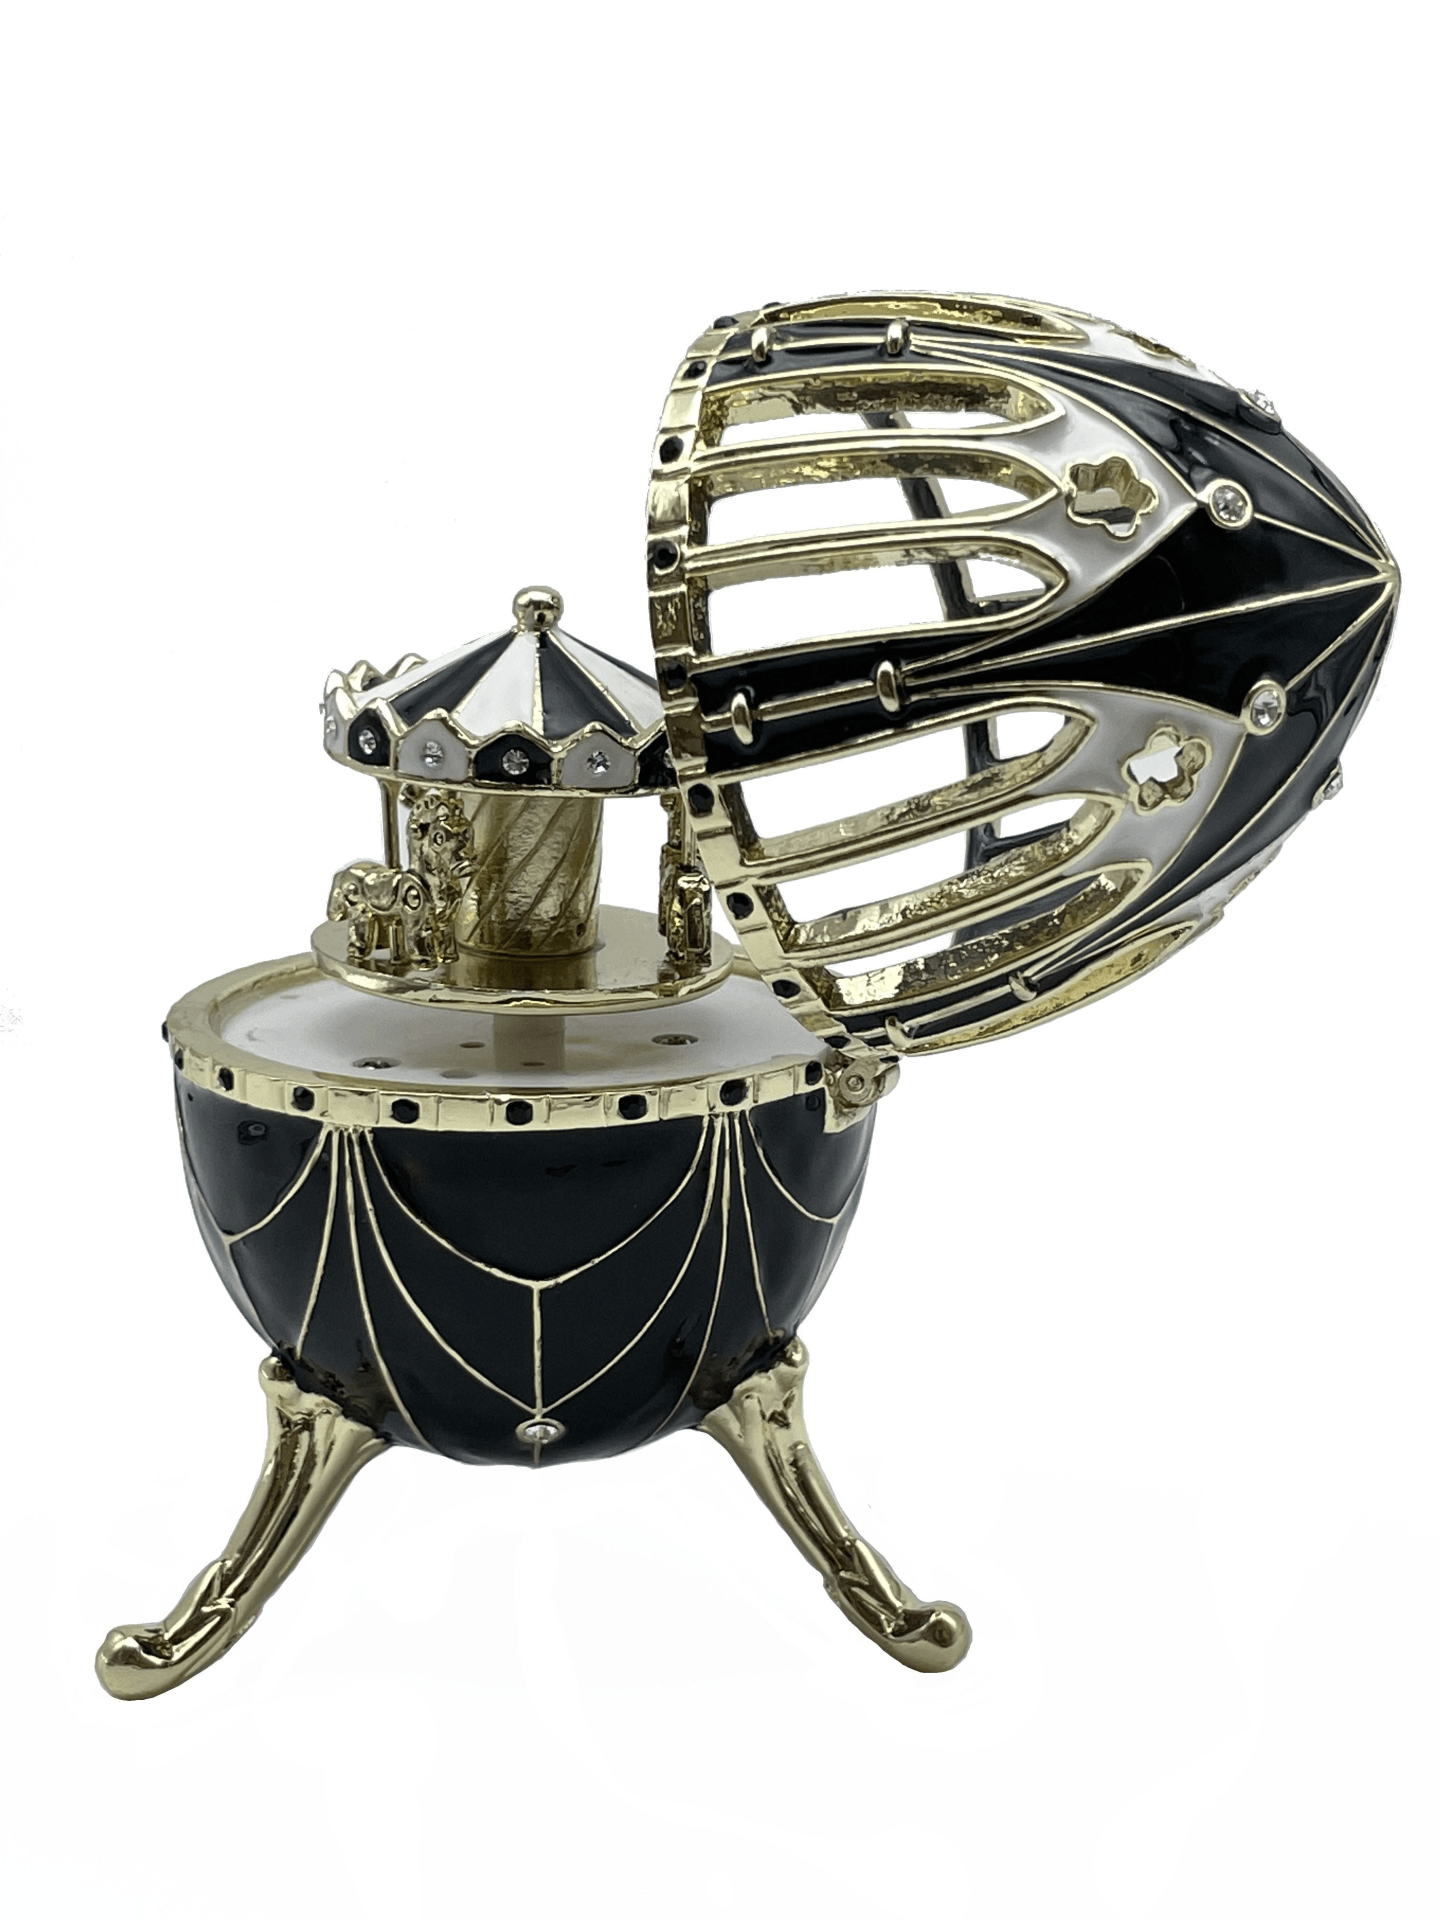 Black and Gold Faberge Egg with Horse Carousel Surprise Inside  